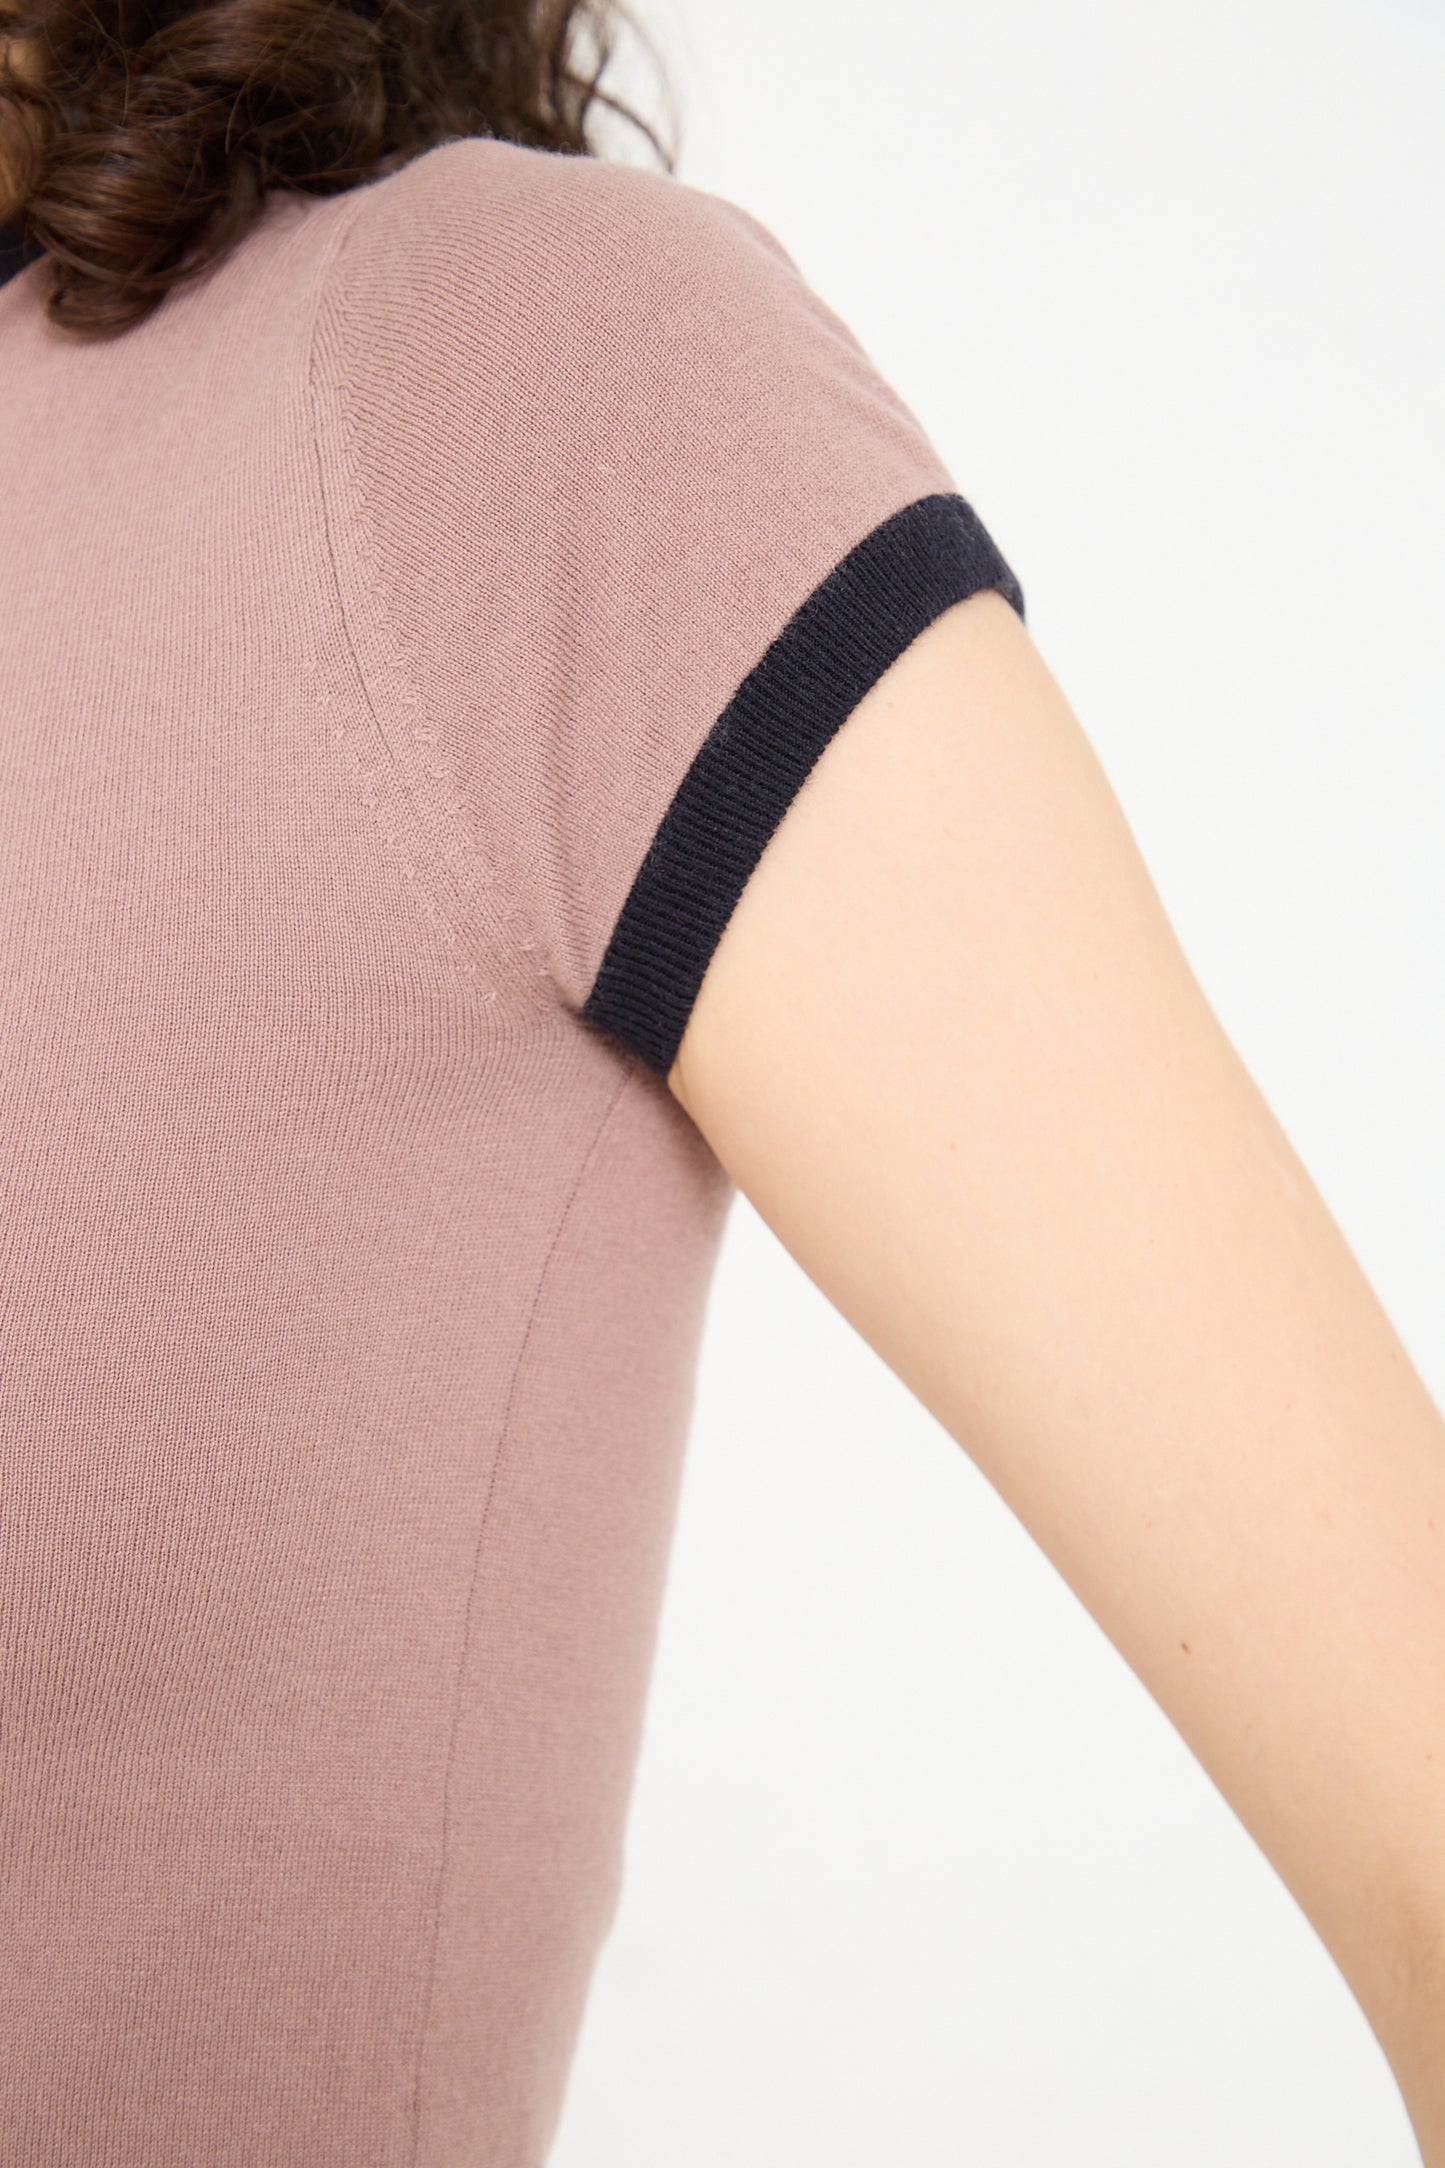 A woman in an Extreme Cashmere Cotton Cashmere No. 339 Chloe Tee in Mauve/Navy.